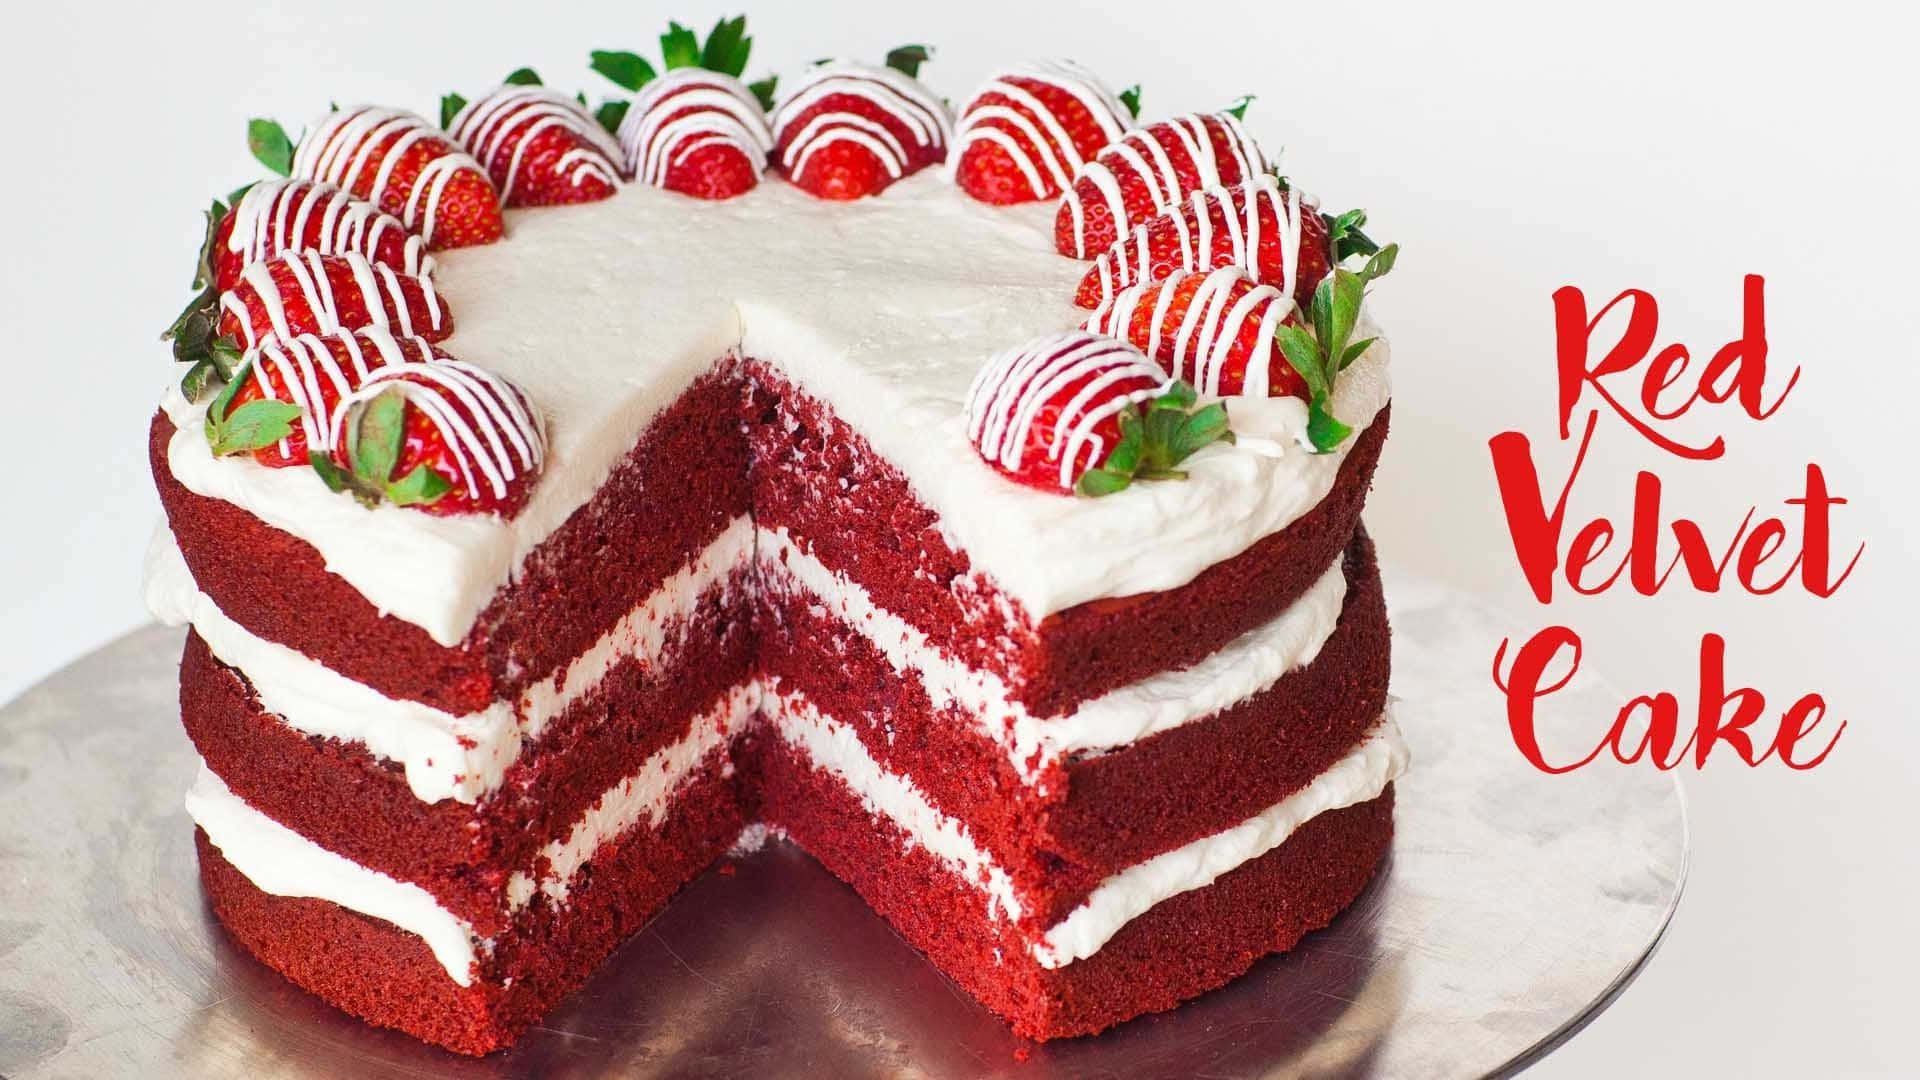 Decadent Red Velvet Cake with Cream Cheese Frosting Wallpaper